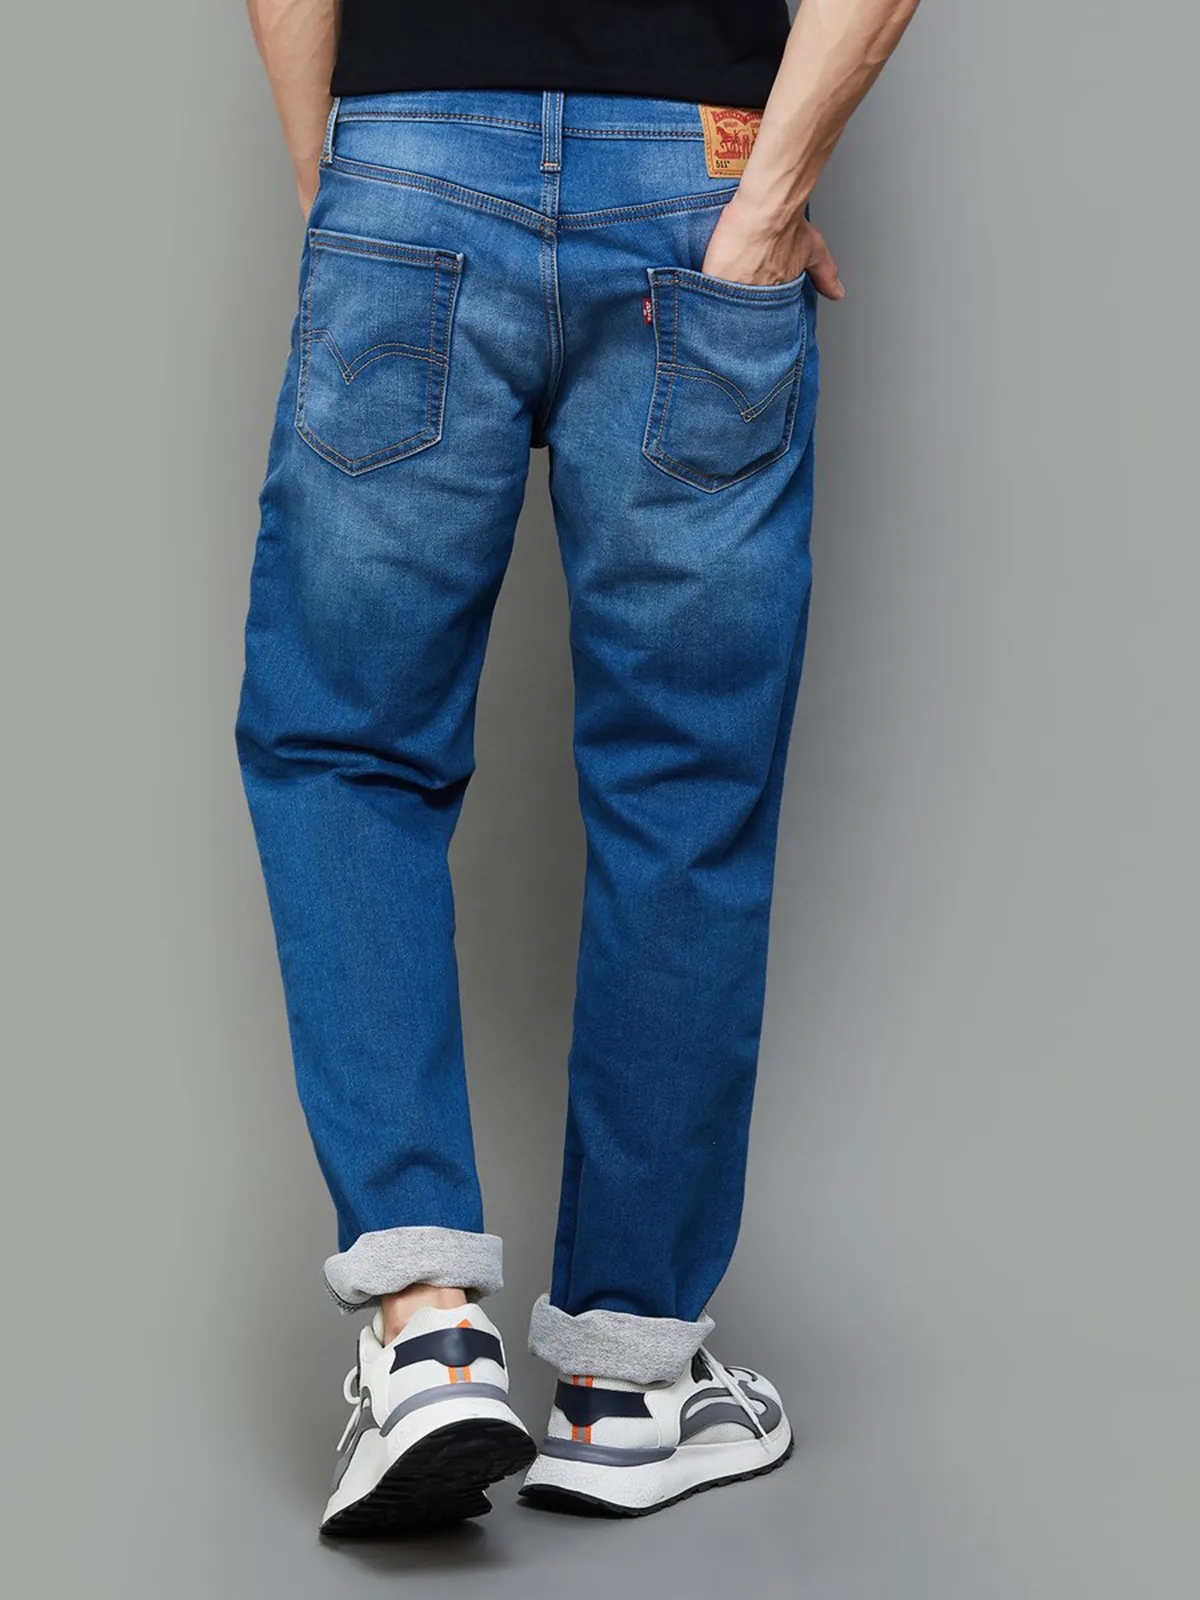 Levis washed 511 slim fit jeans in blue